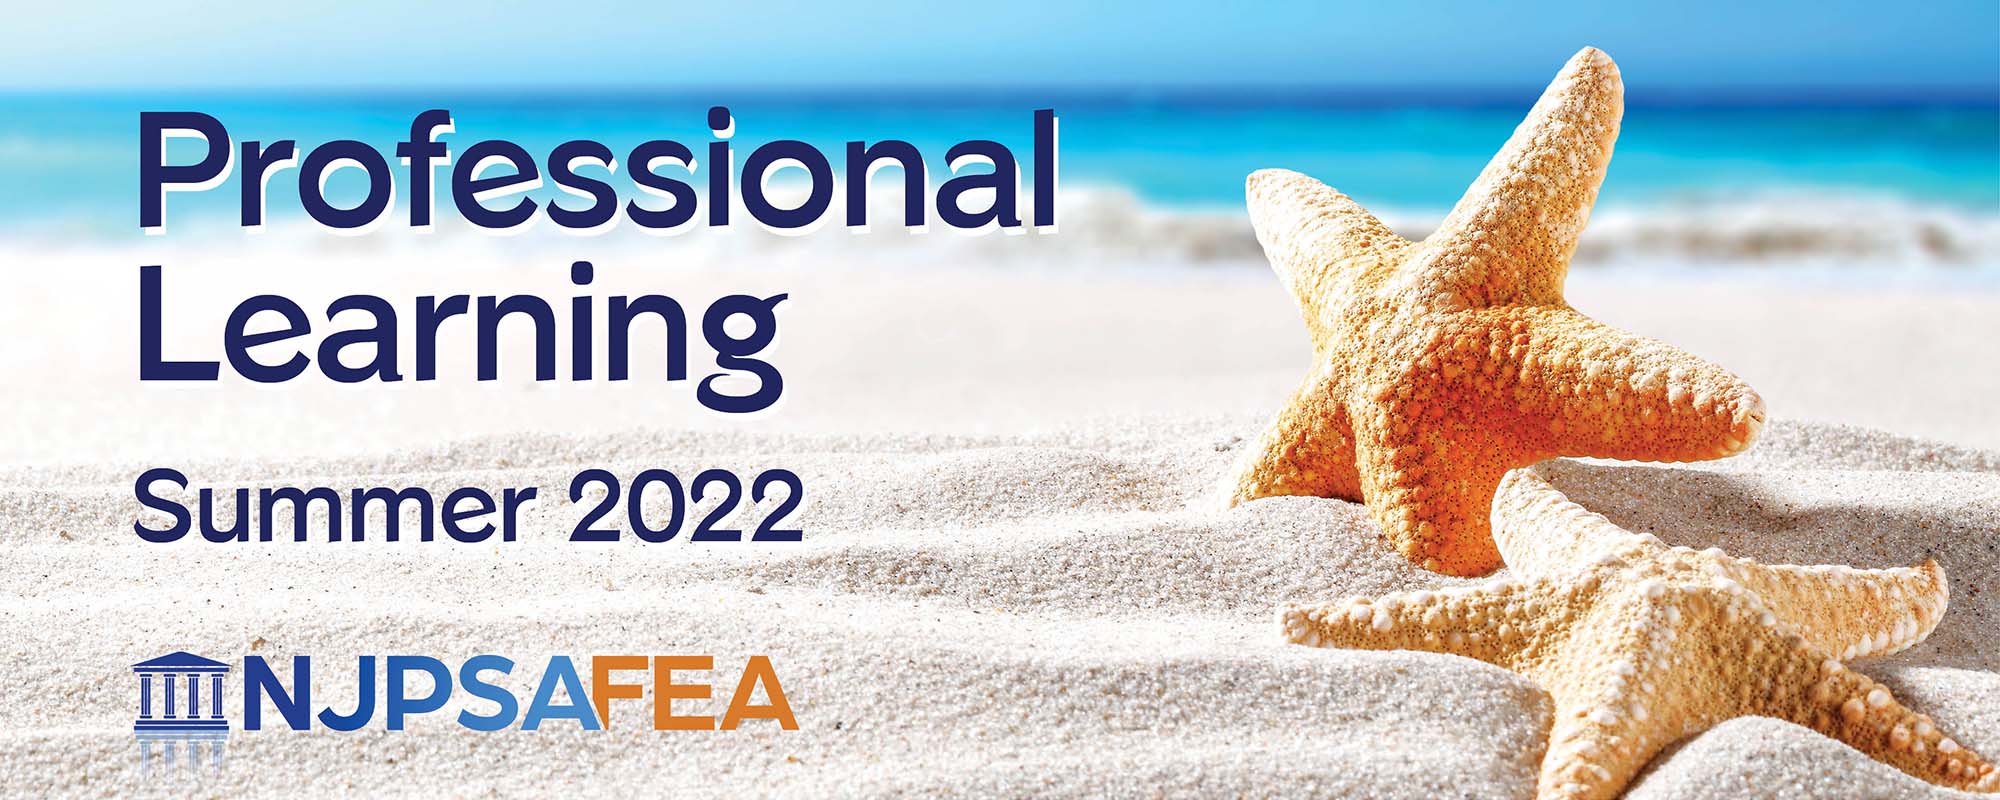 Summer 2022 FEA Catalog of Events Is Now Available